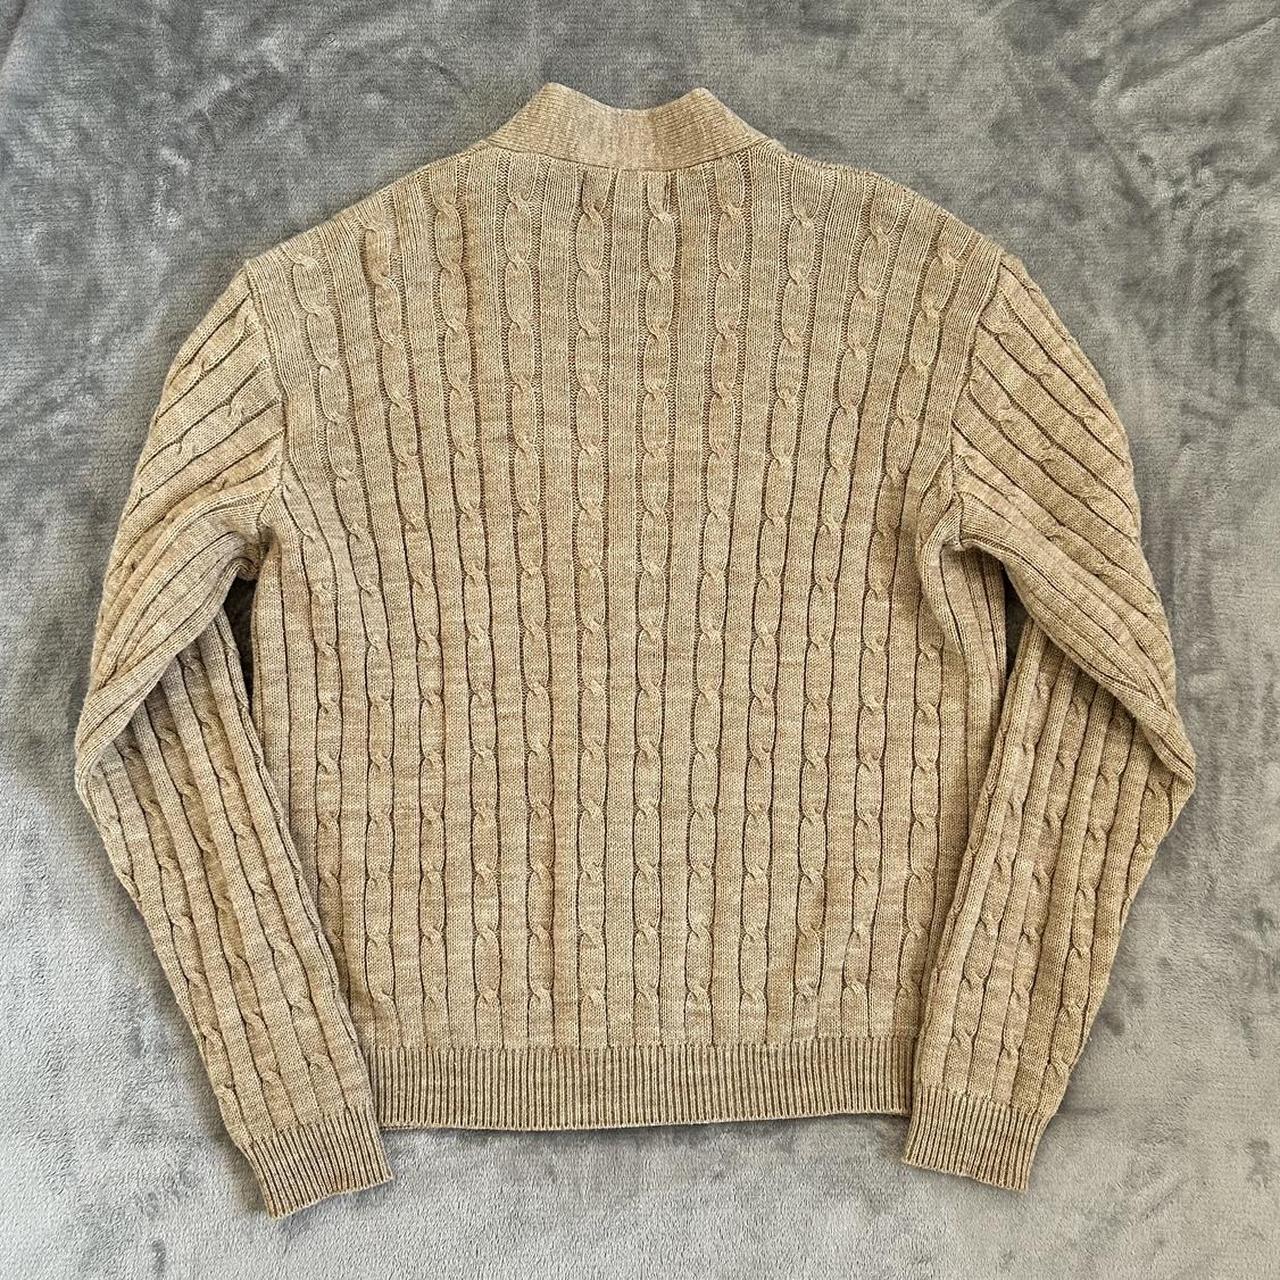 Tan Button Up Knit Cardigan Such a perfect layering... - Depop